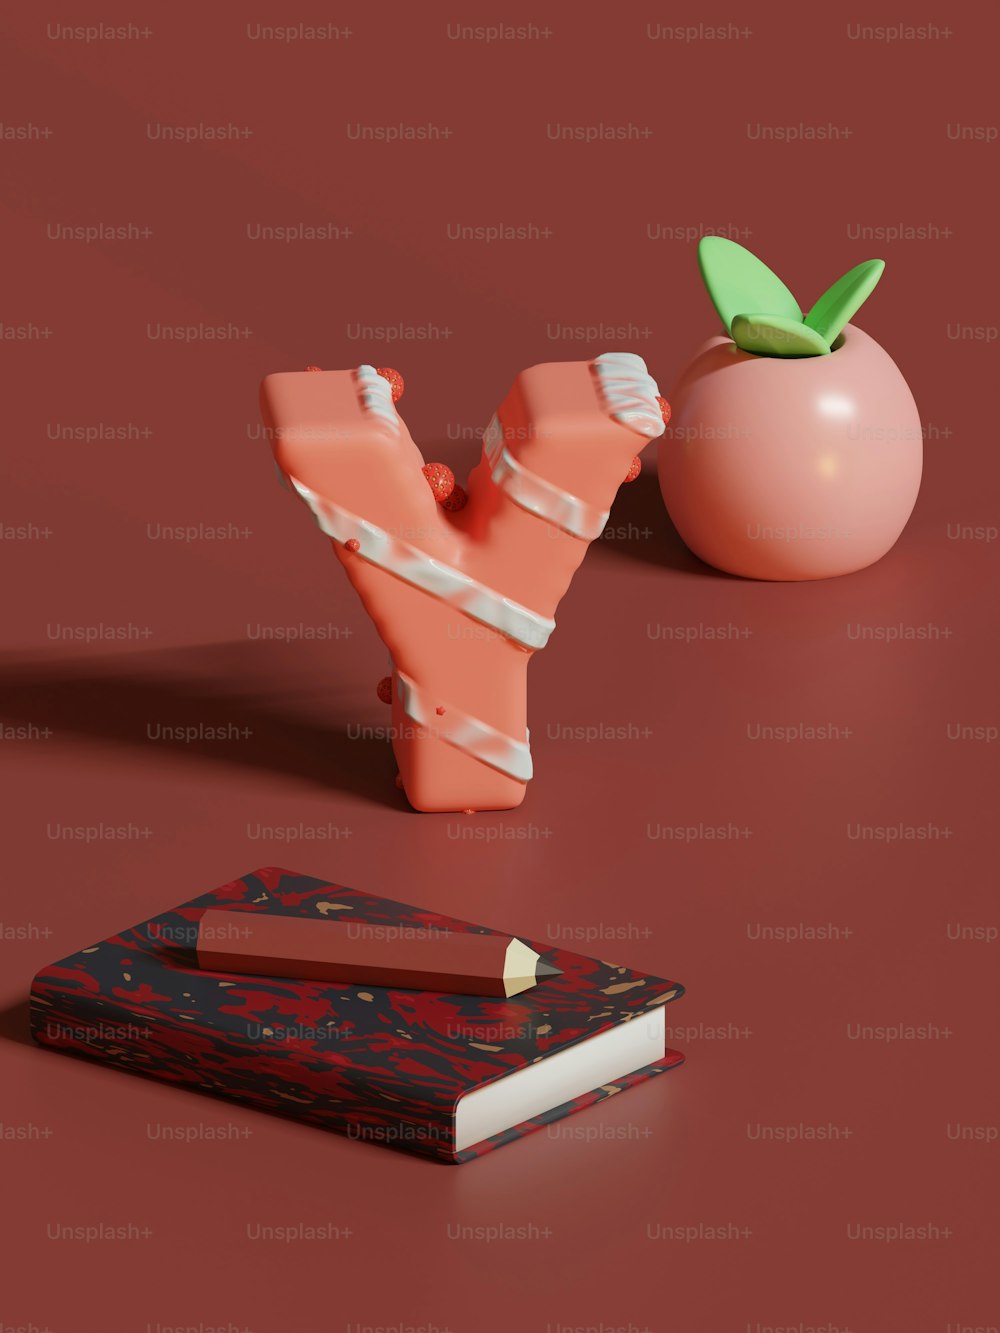 a piece of paper next to an apple and a book